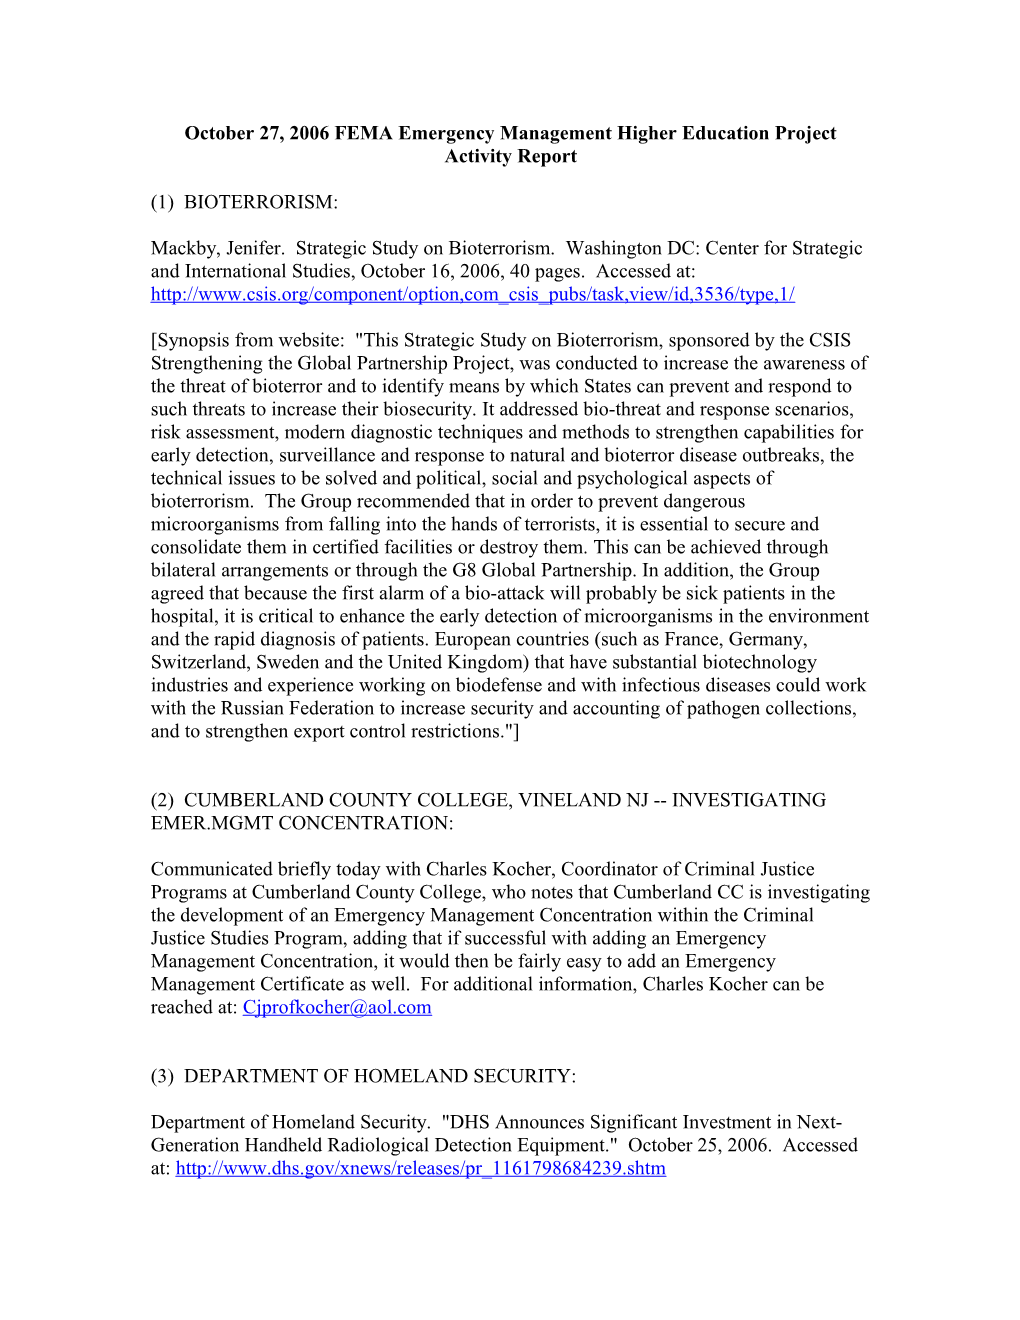 October 27, 2006 FEMA Emergency Management Higher Education Project Activity Report